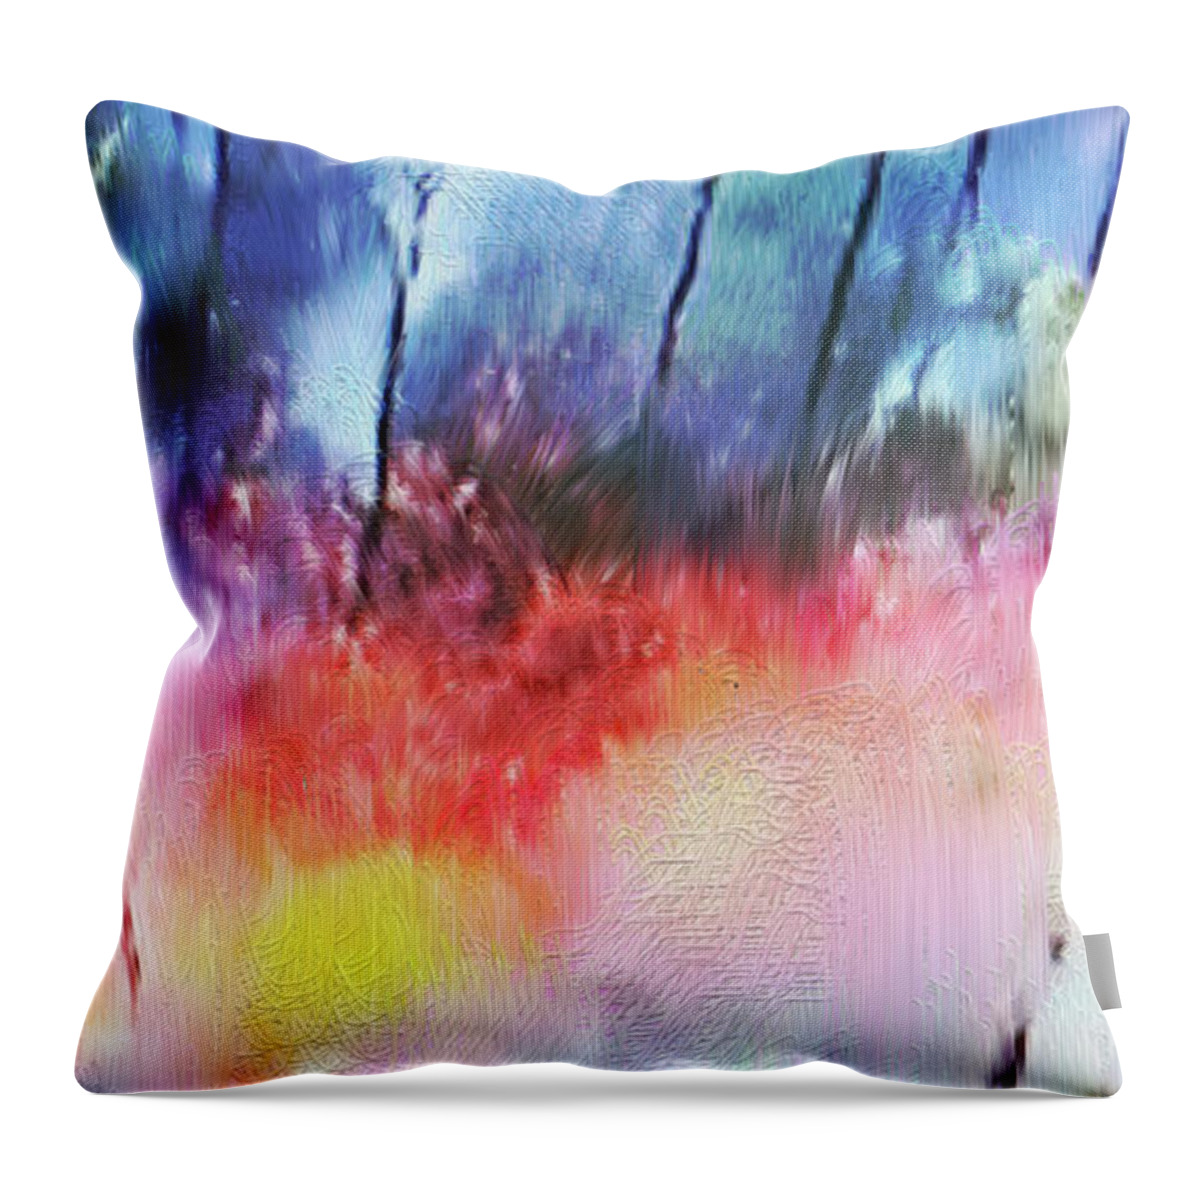 Blue Throw Pillow featuring the mixed media Volcanic Fissures 2 by Karen Nicholson